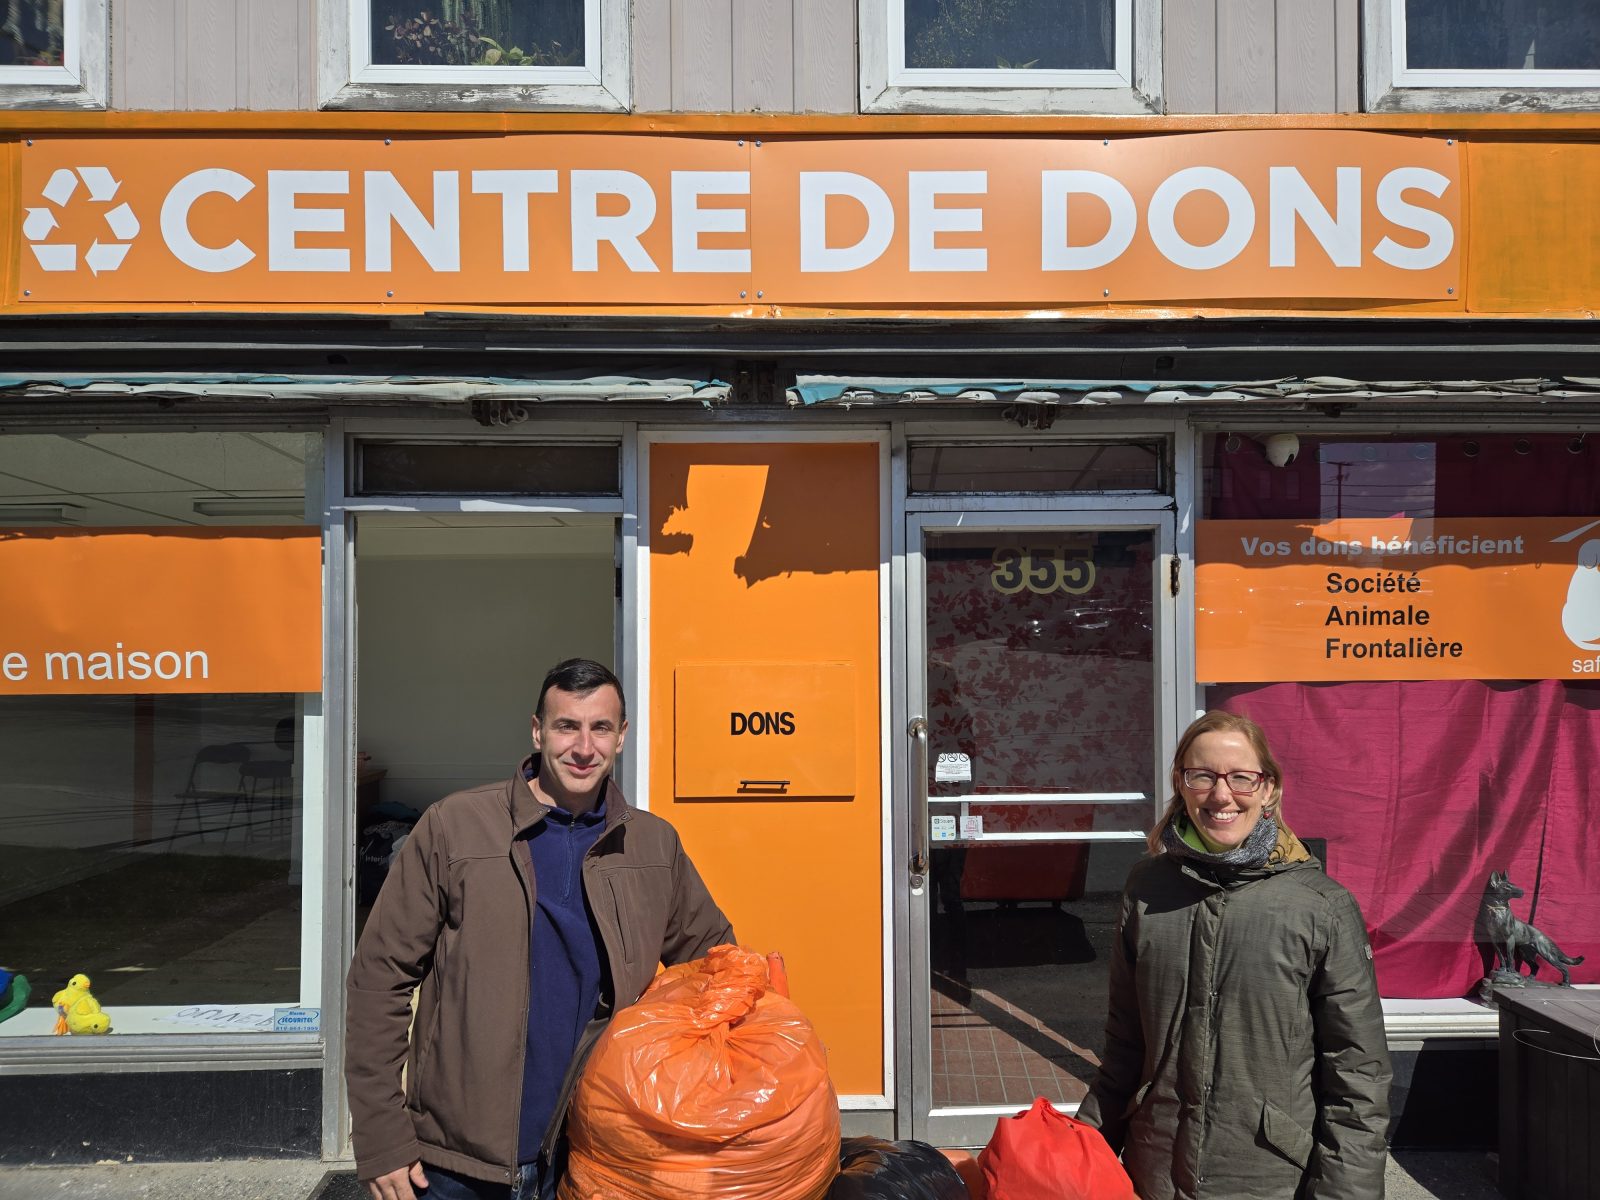 Sherbrooke donation center celebrates Earth Day with a “Mega Donation Drive”